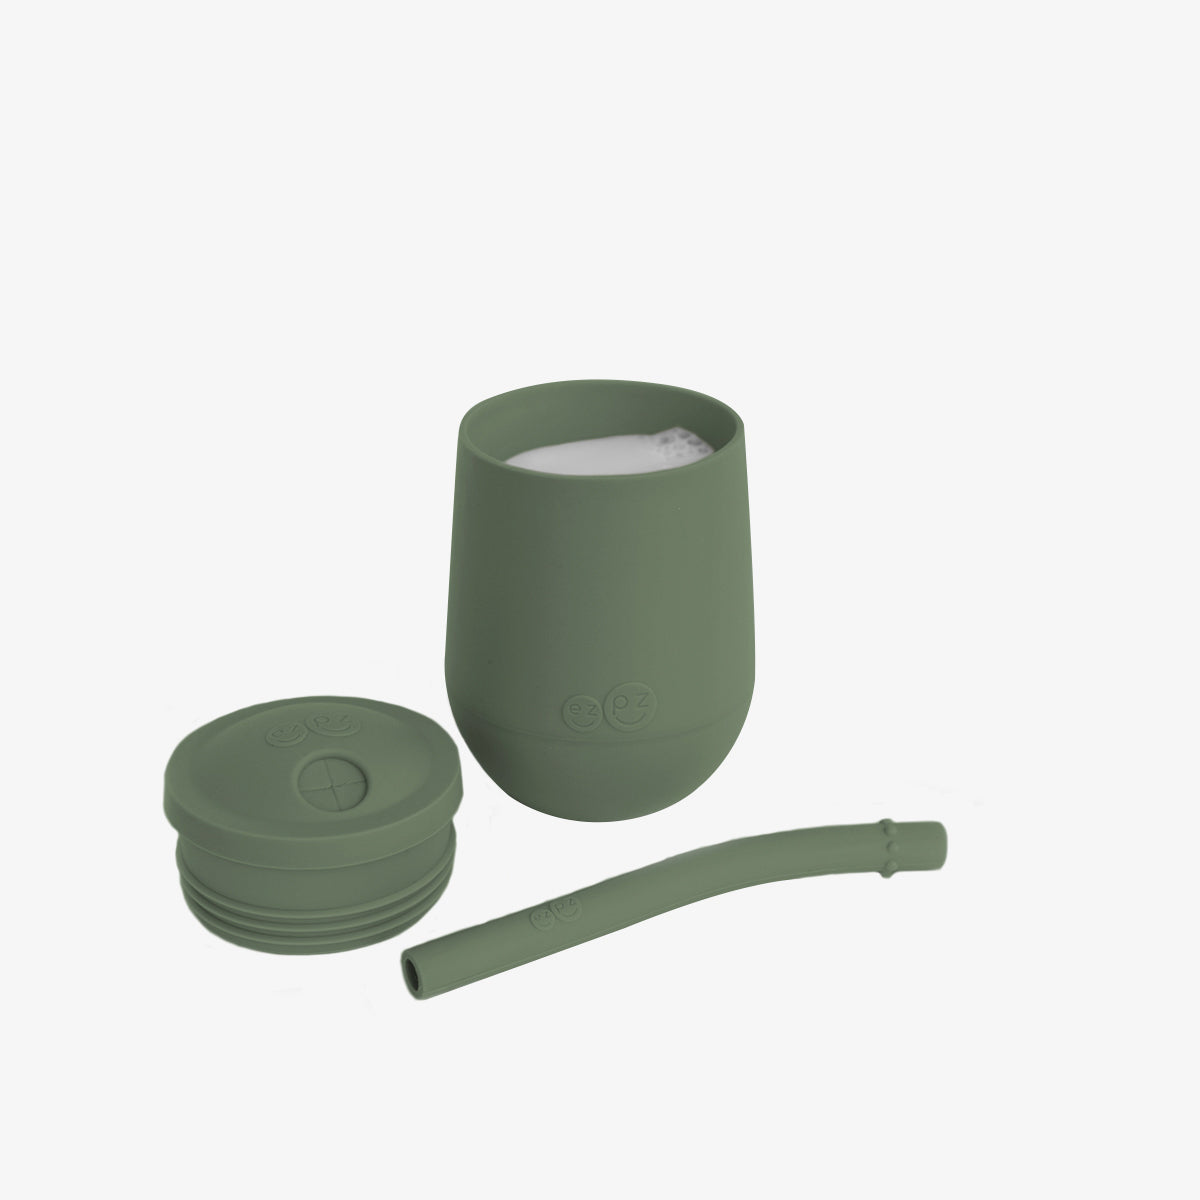 The Mini Cup + Straw in Olive by ezpz / Silicone Drinking Cup and Straw Training System for Toddlers